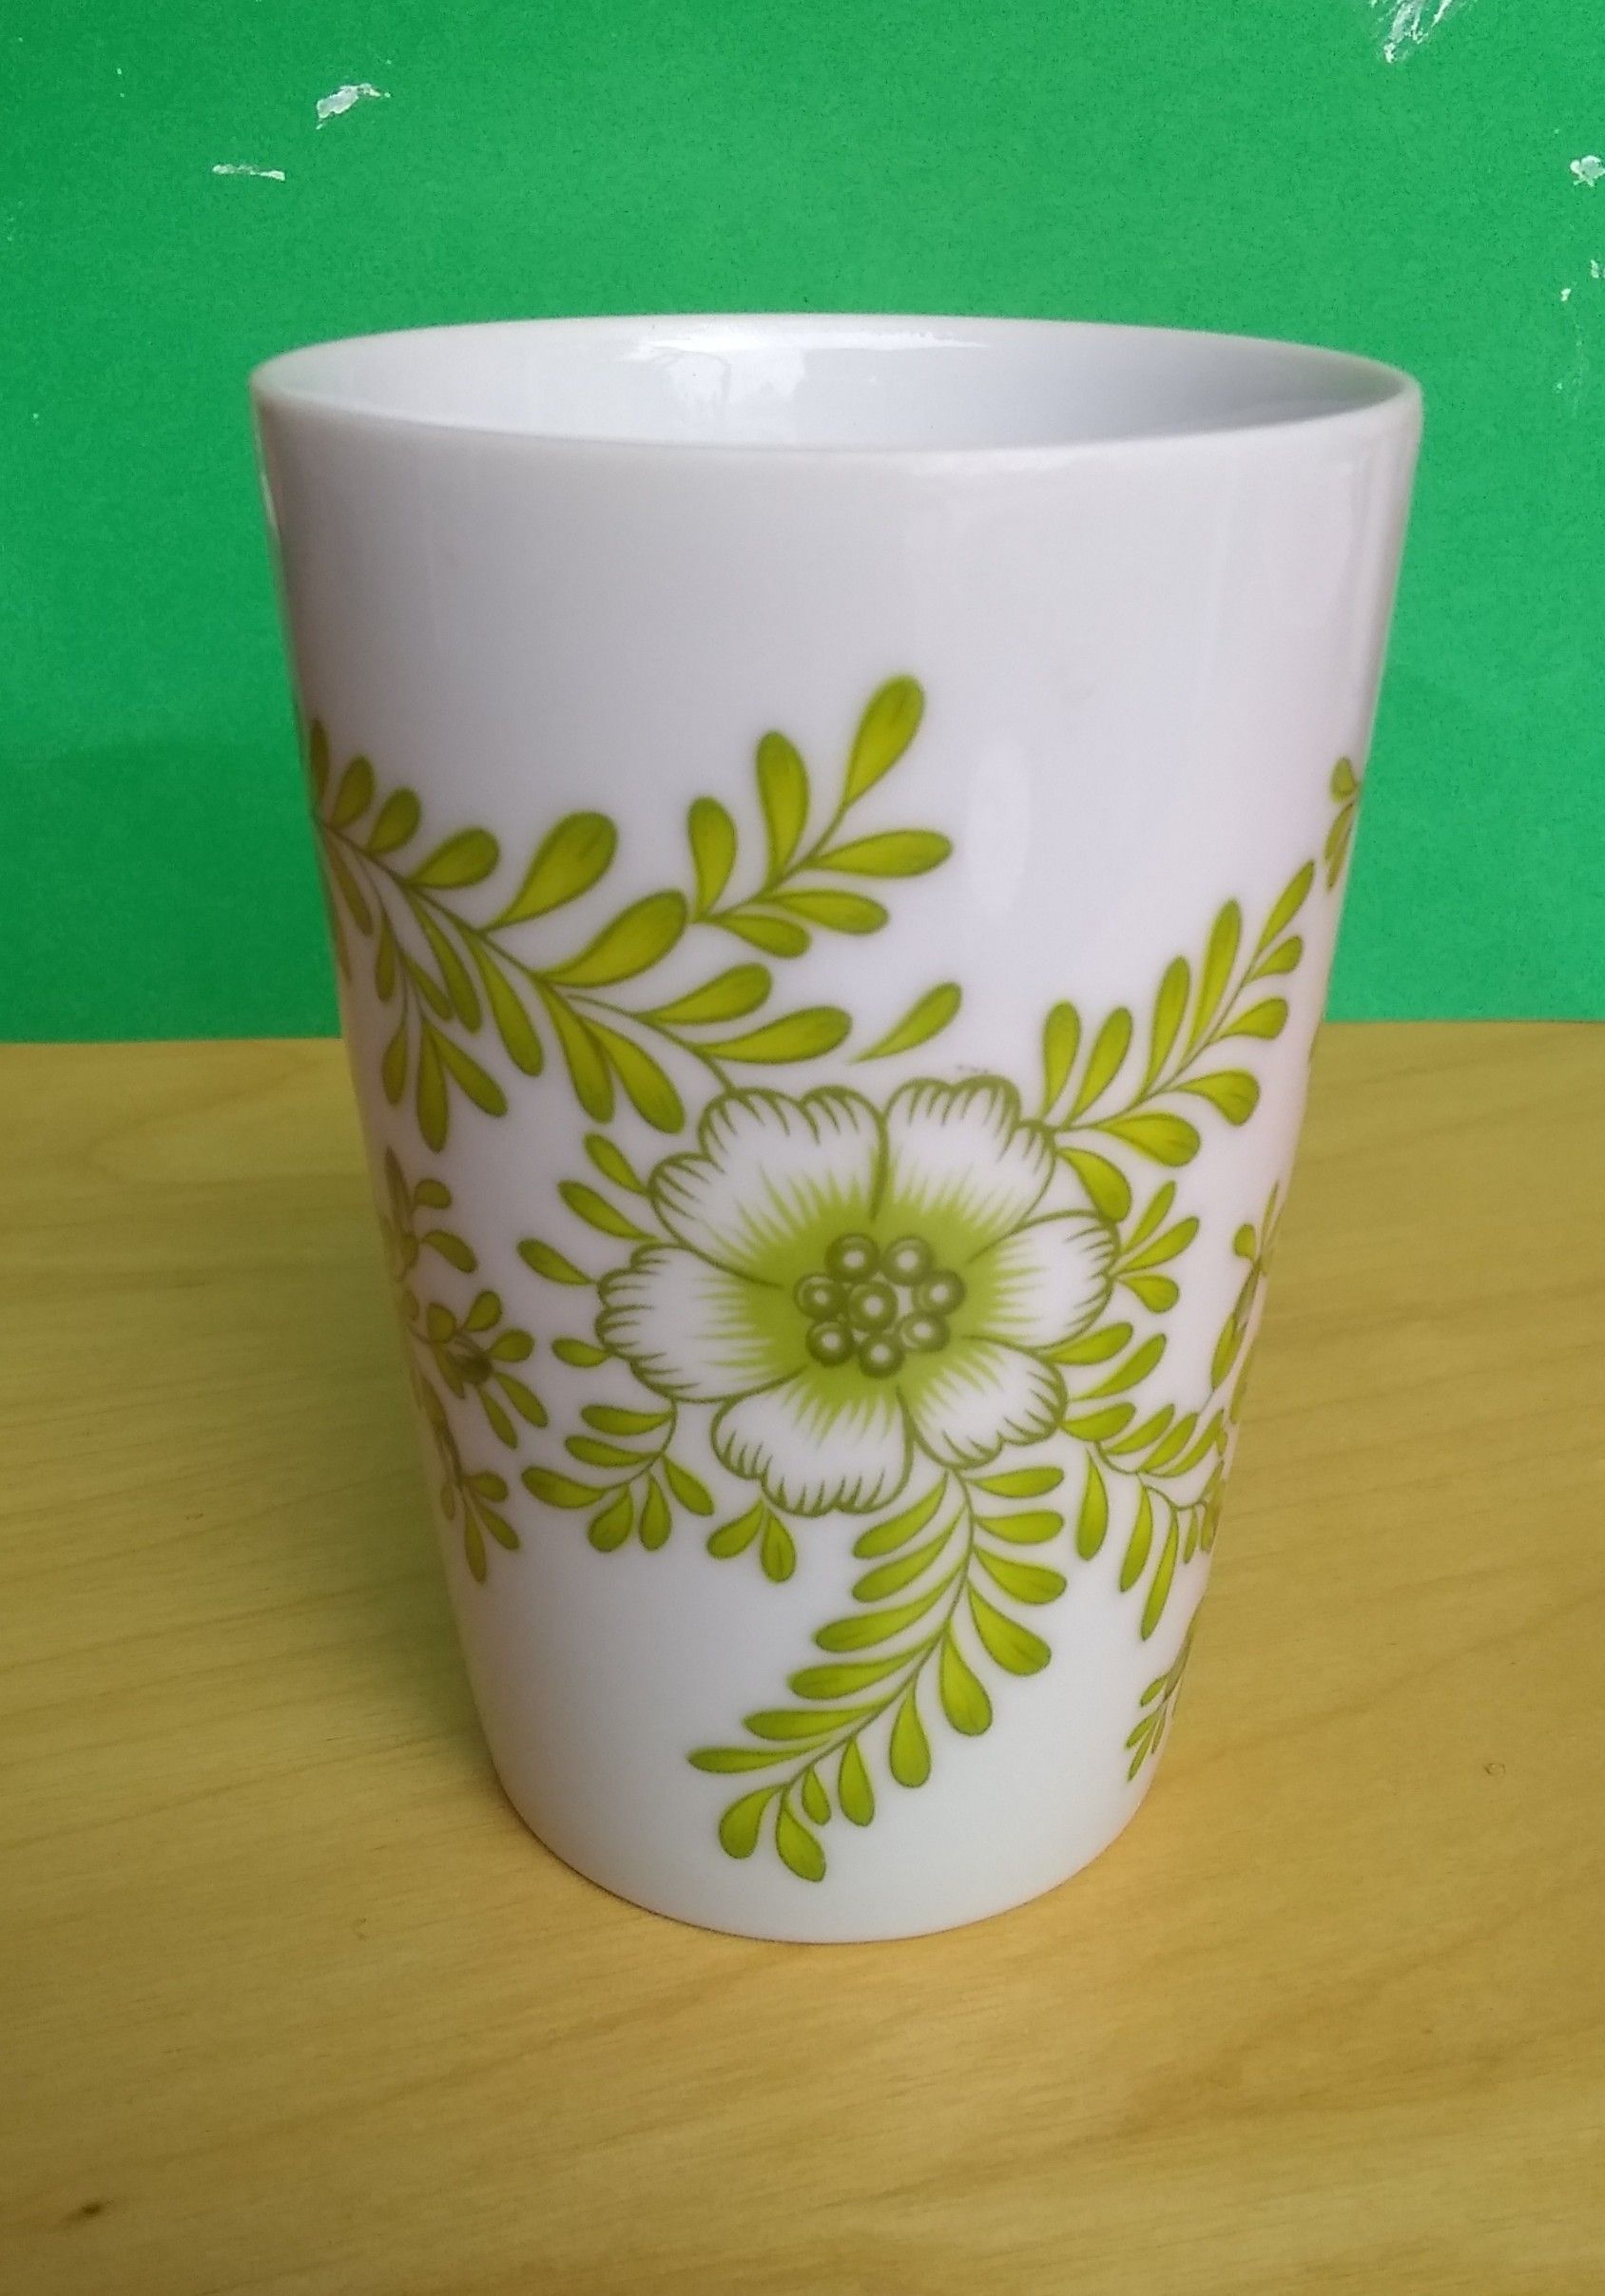 Vintage White Ceramic Cup with Green Fern And Flowers